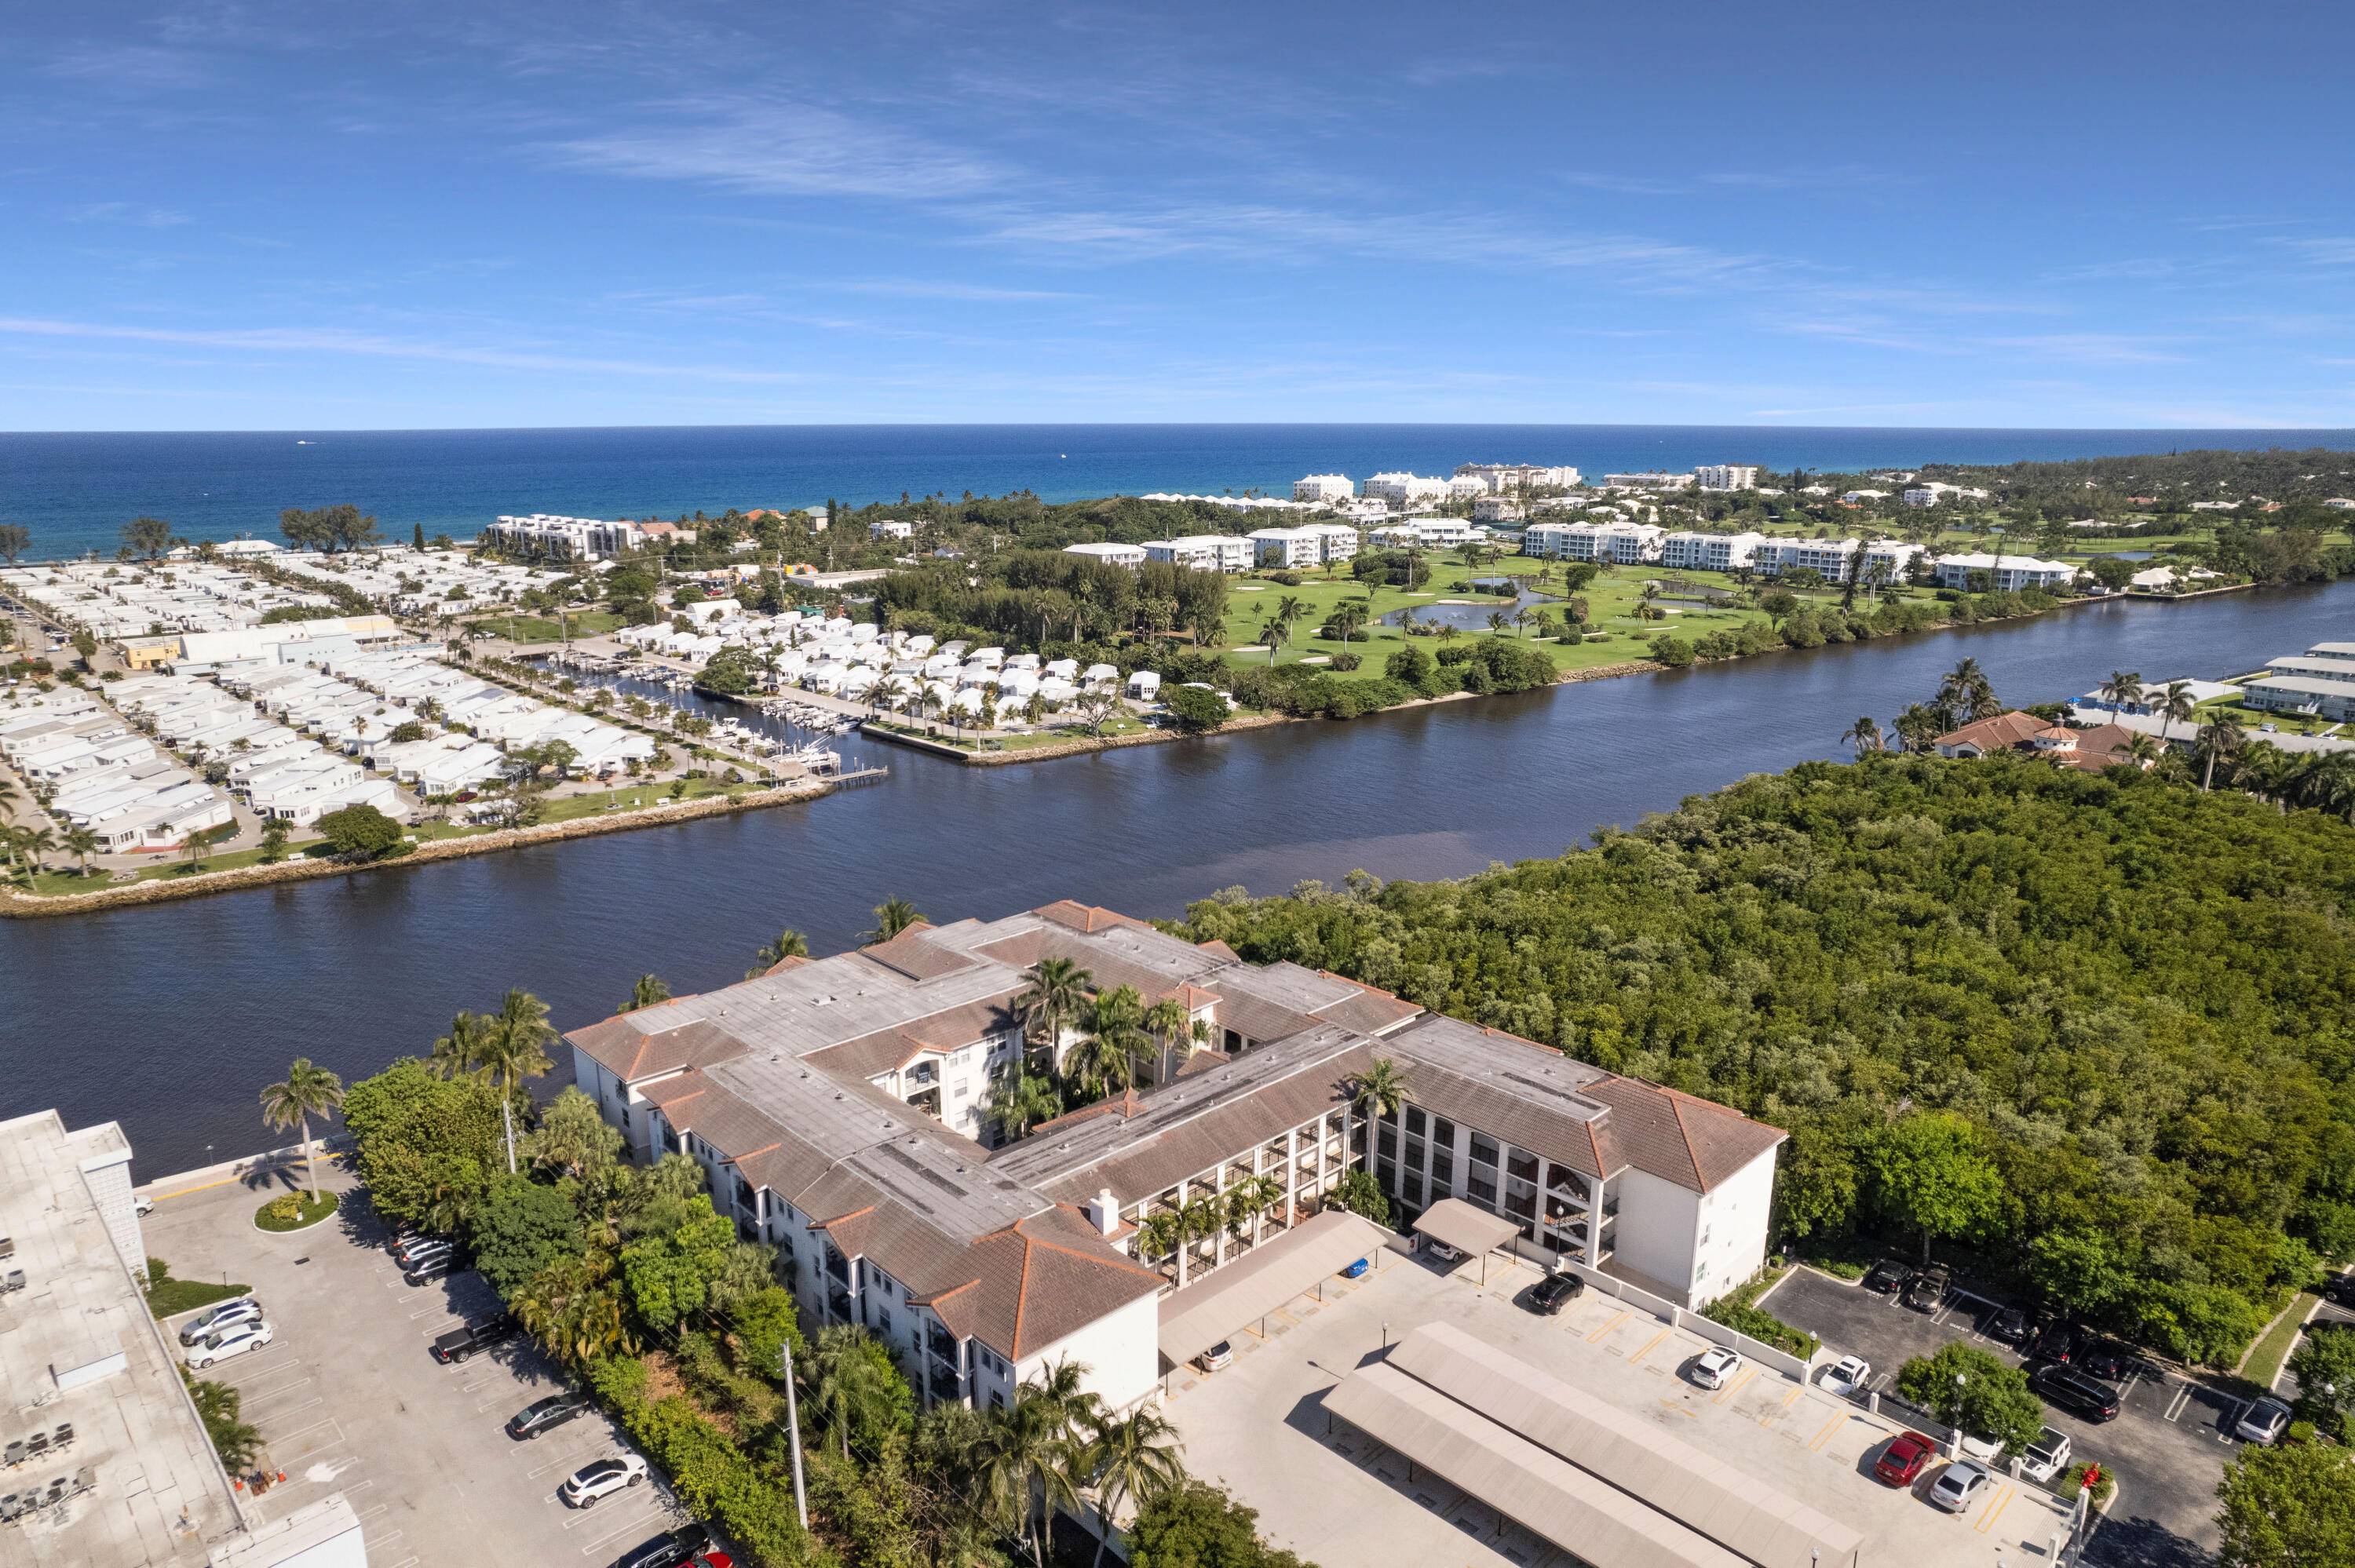 Welcome home to resort style living in this pristine 2 bedroom 2 bath condo located in the picturesque community of Tuscany on the Intracoastal.